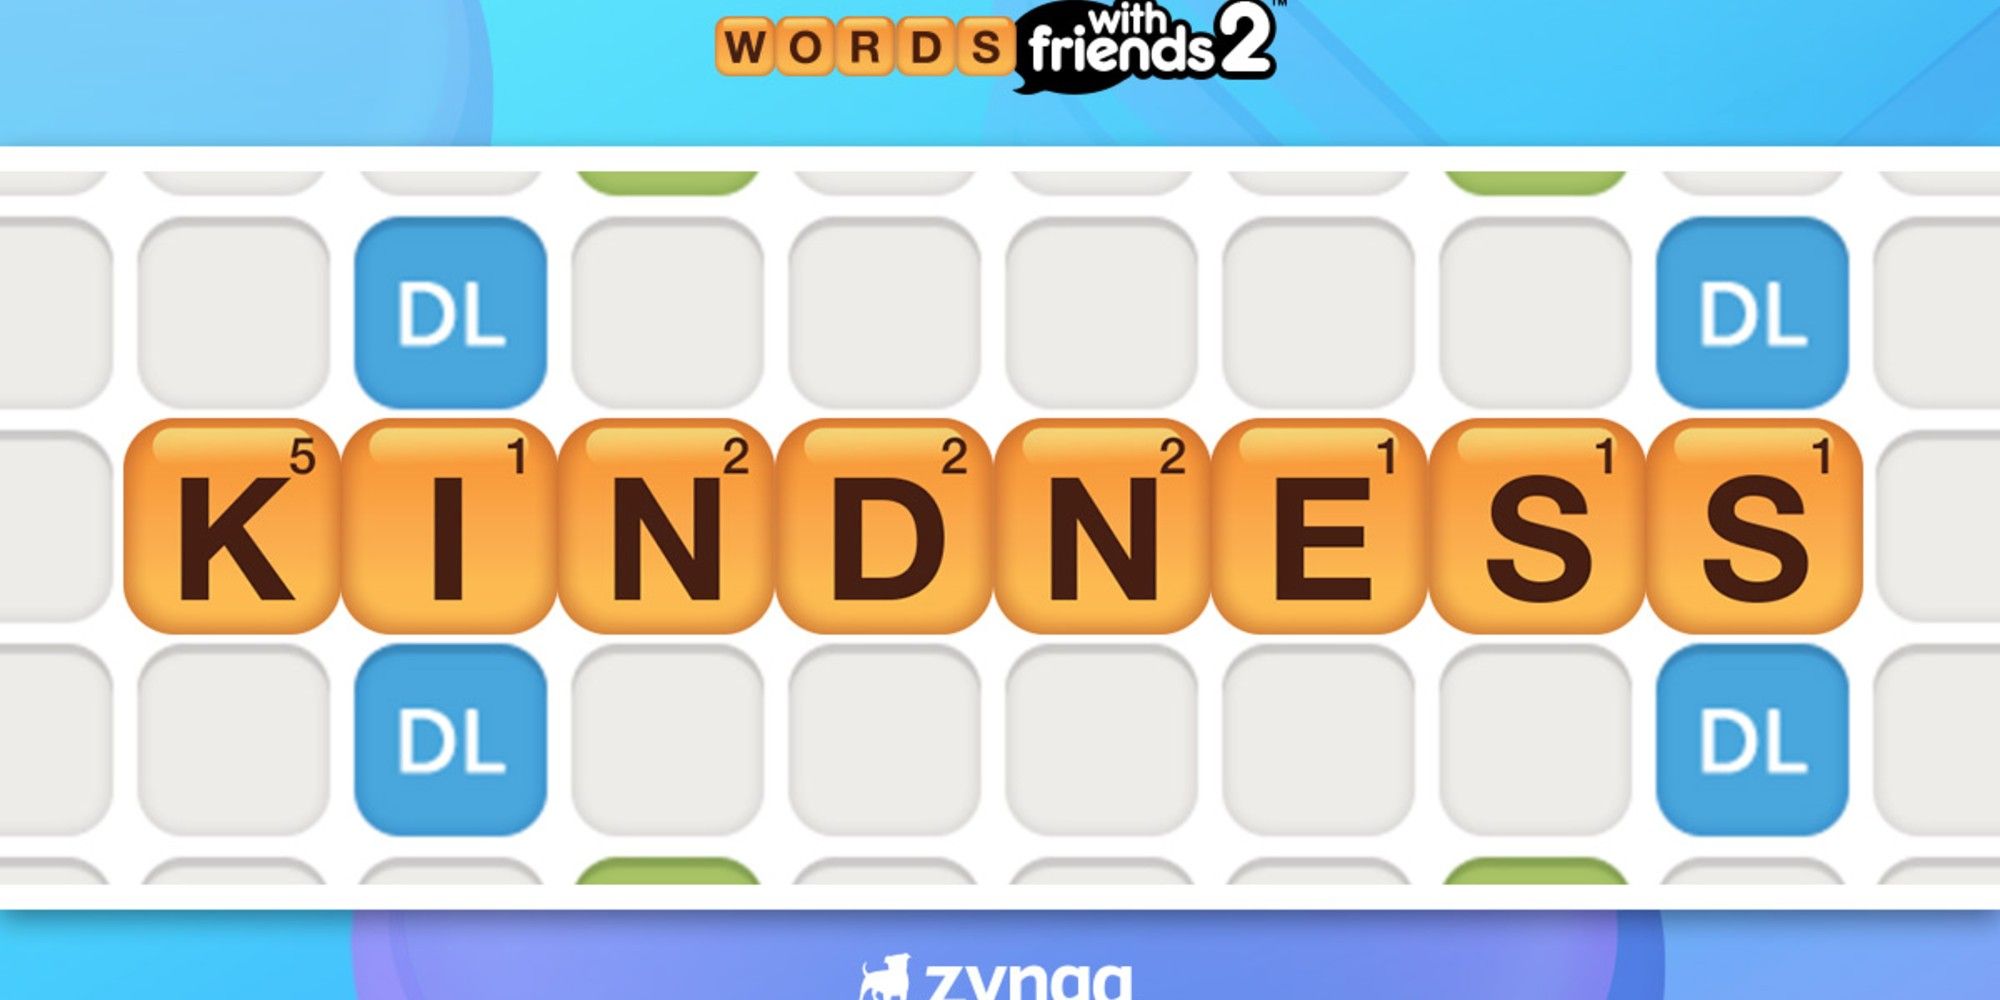 Lady Gaga Foundation & Words With Friends Team Up For #BeKind Initiative